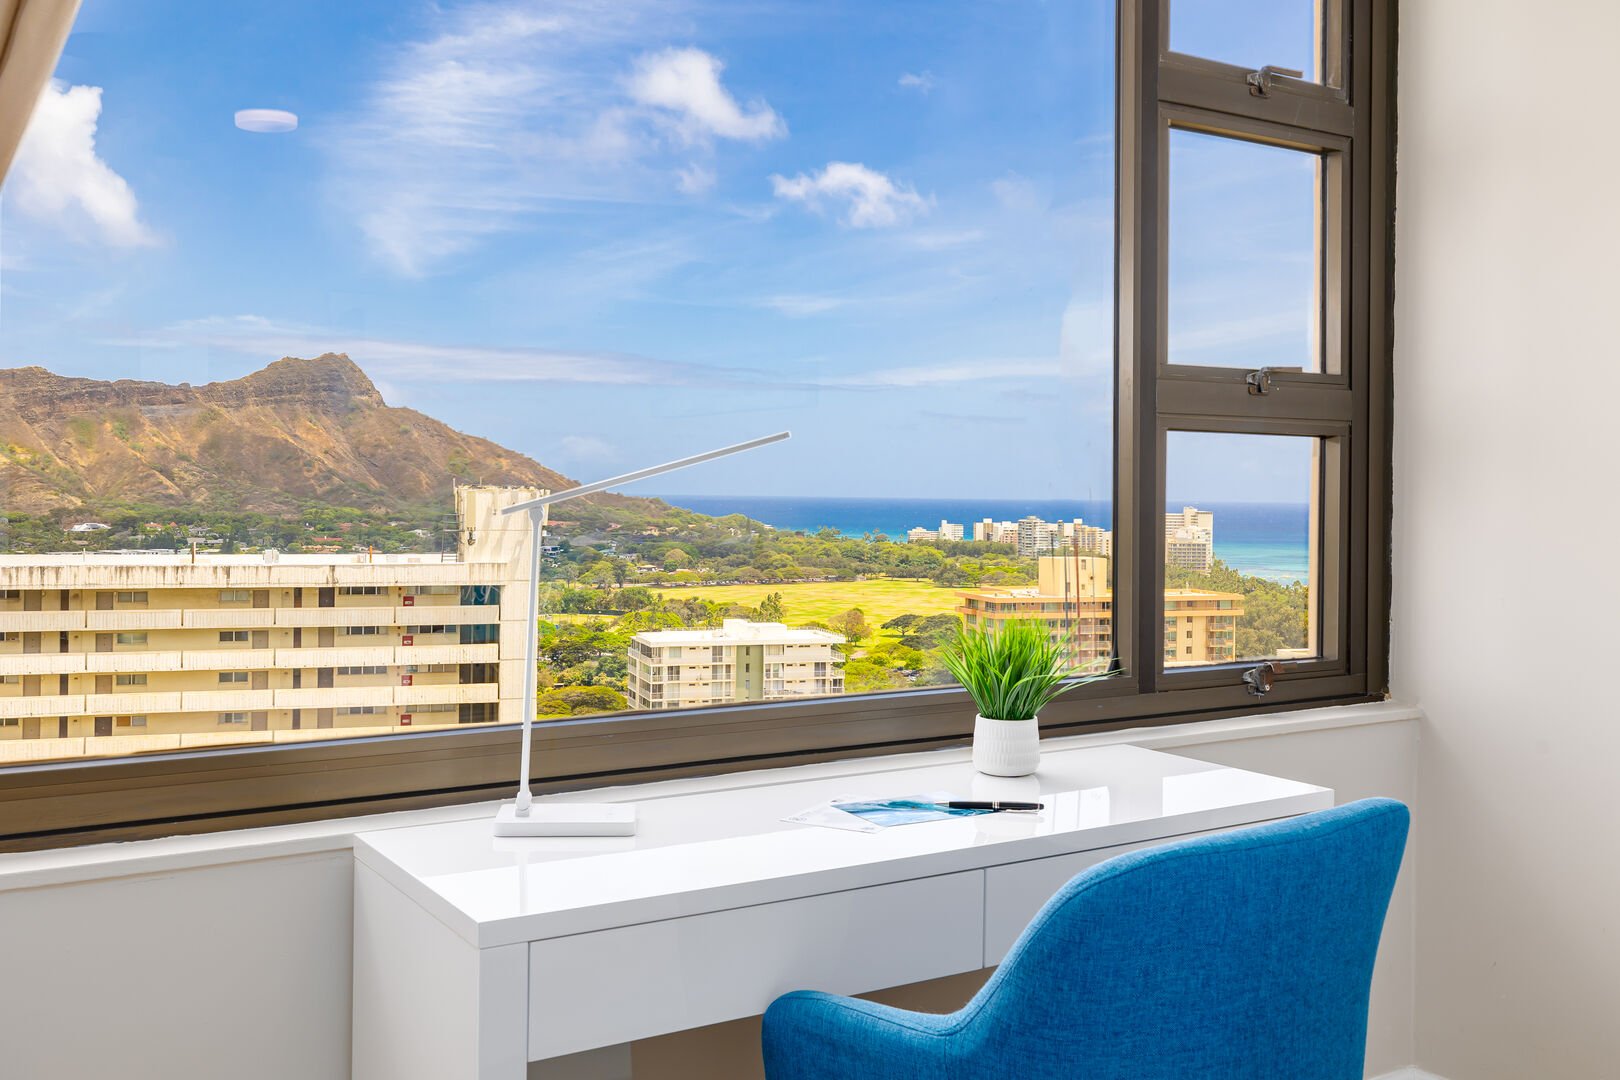 Designate work space. Can you imagine working with that view?